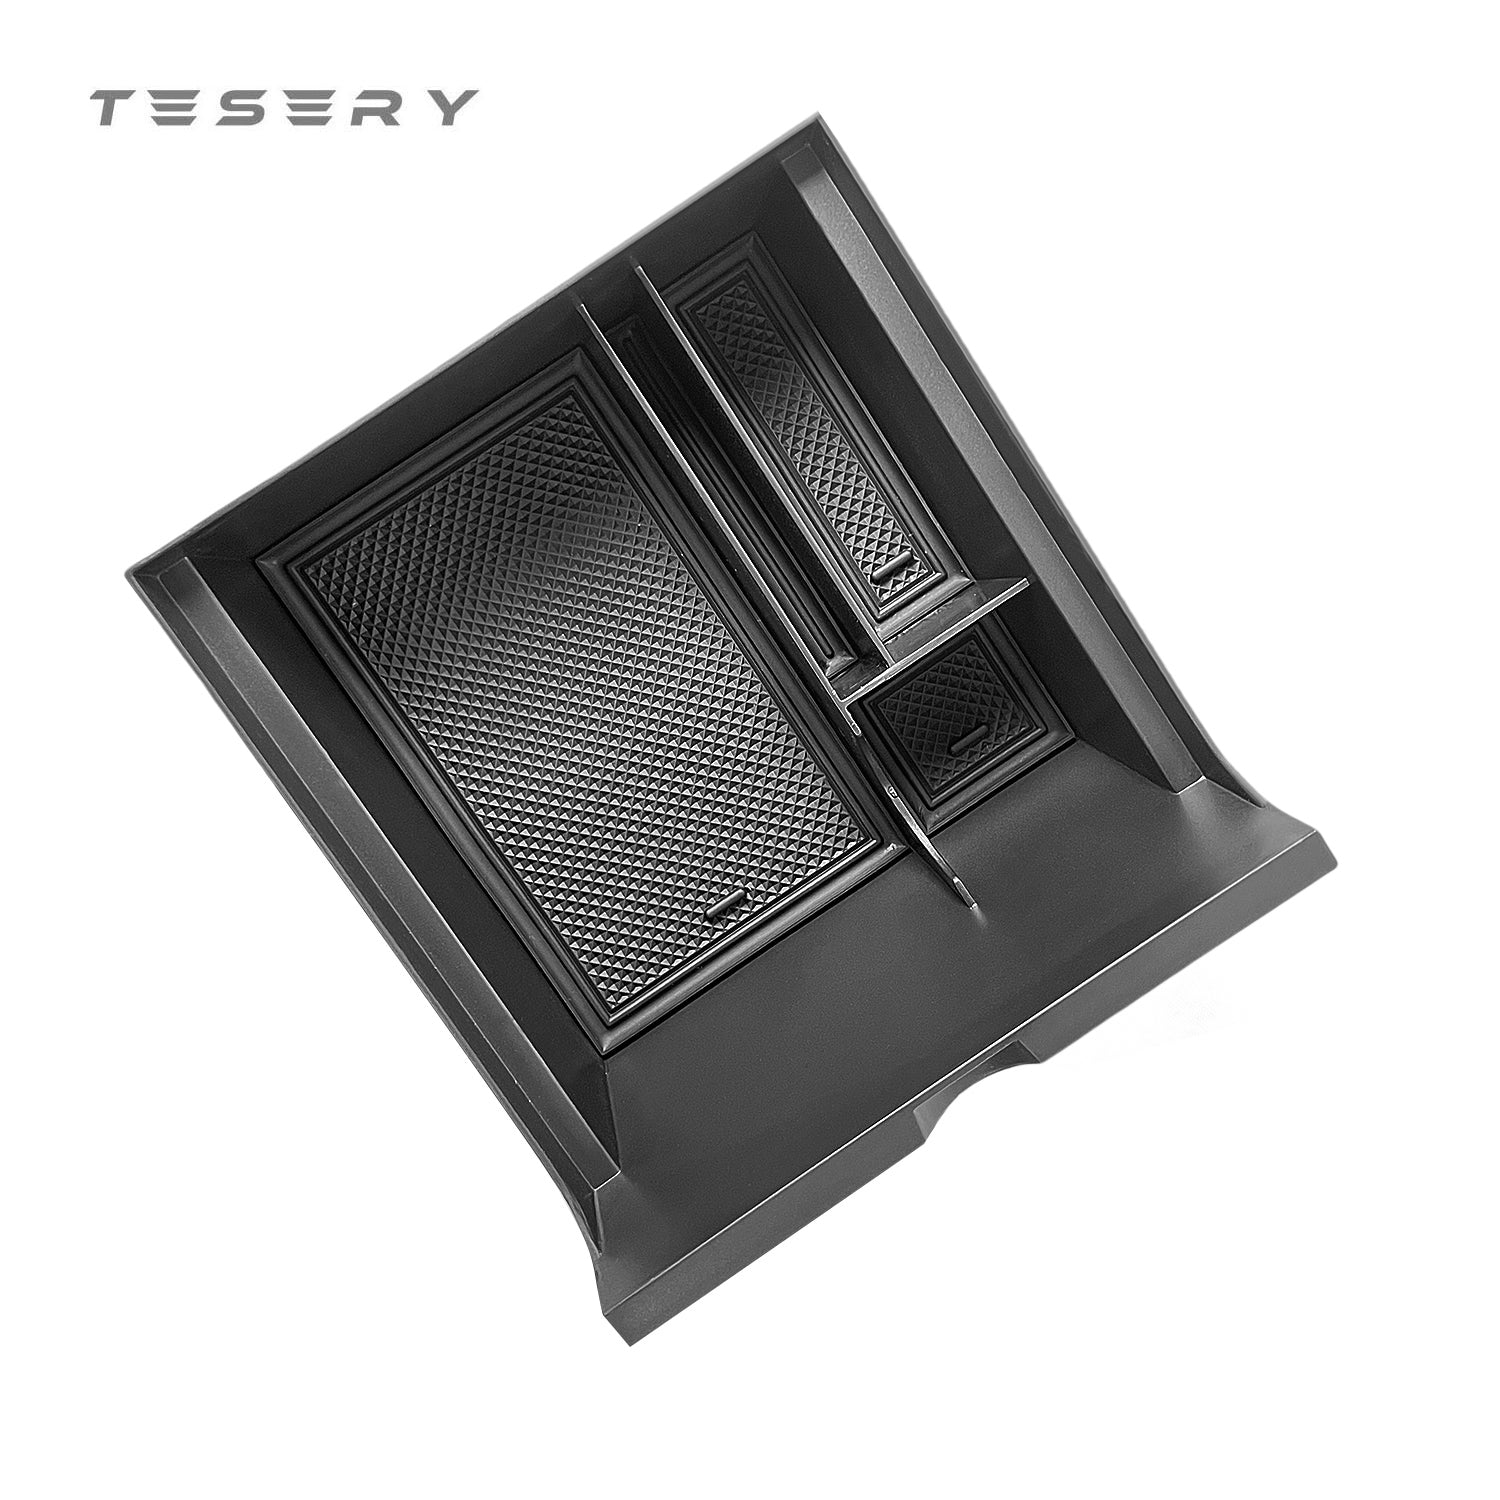 2befair organizer box for the center console of the Tesla Model 3/Y